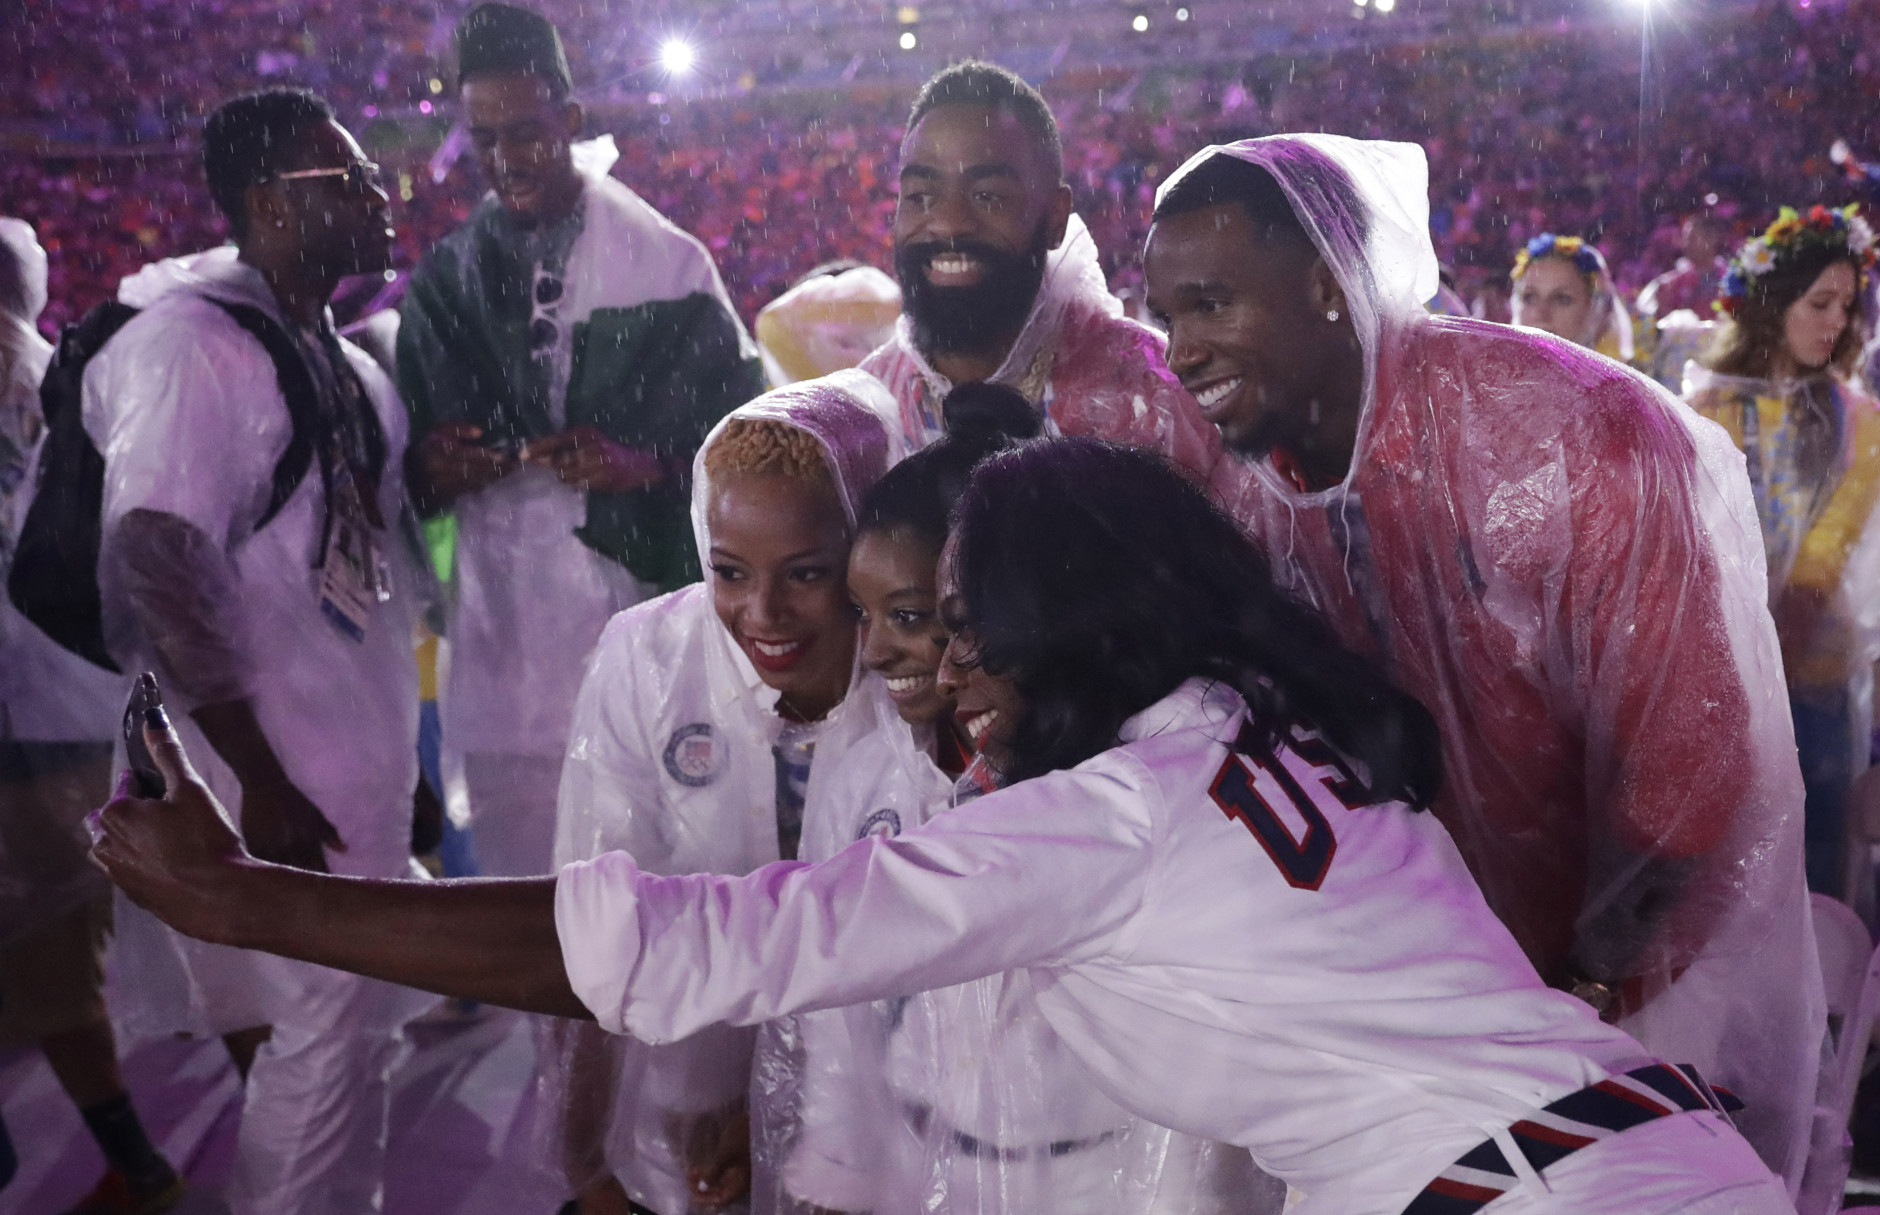 Athletes from the United States pose for a photo with Simone Biles during the closing ceremony in the Maracana stadium at the 2016 Summer Olympics in Rio de Janeiro, Brazil, Sunday, Aug. 21, 2016. (AP Photo/Matt Dunham)